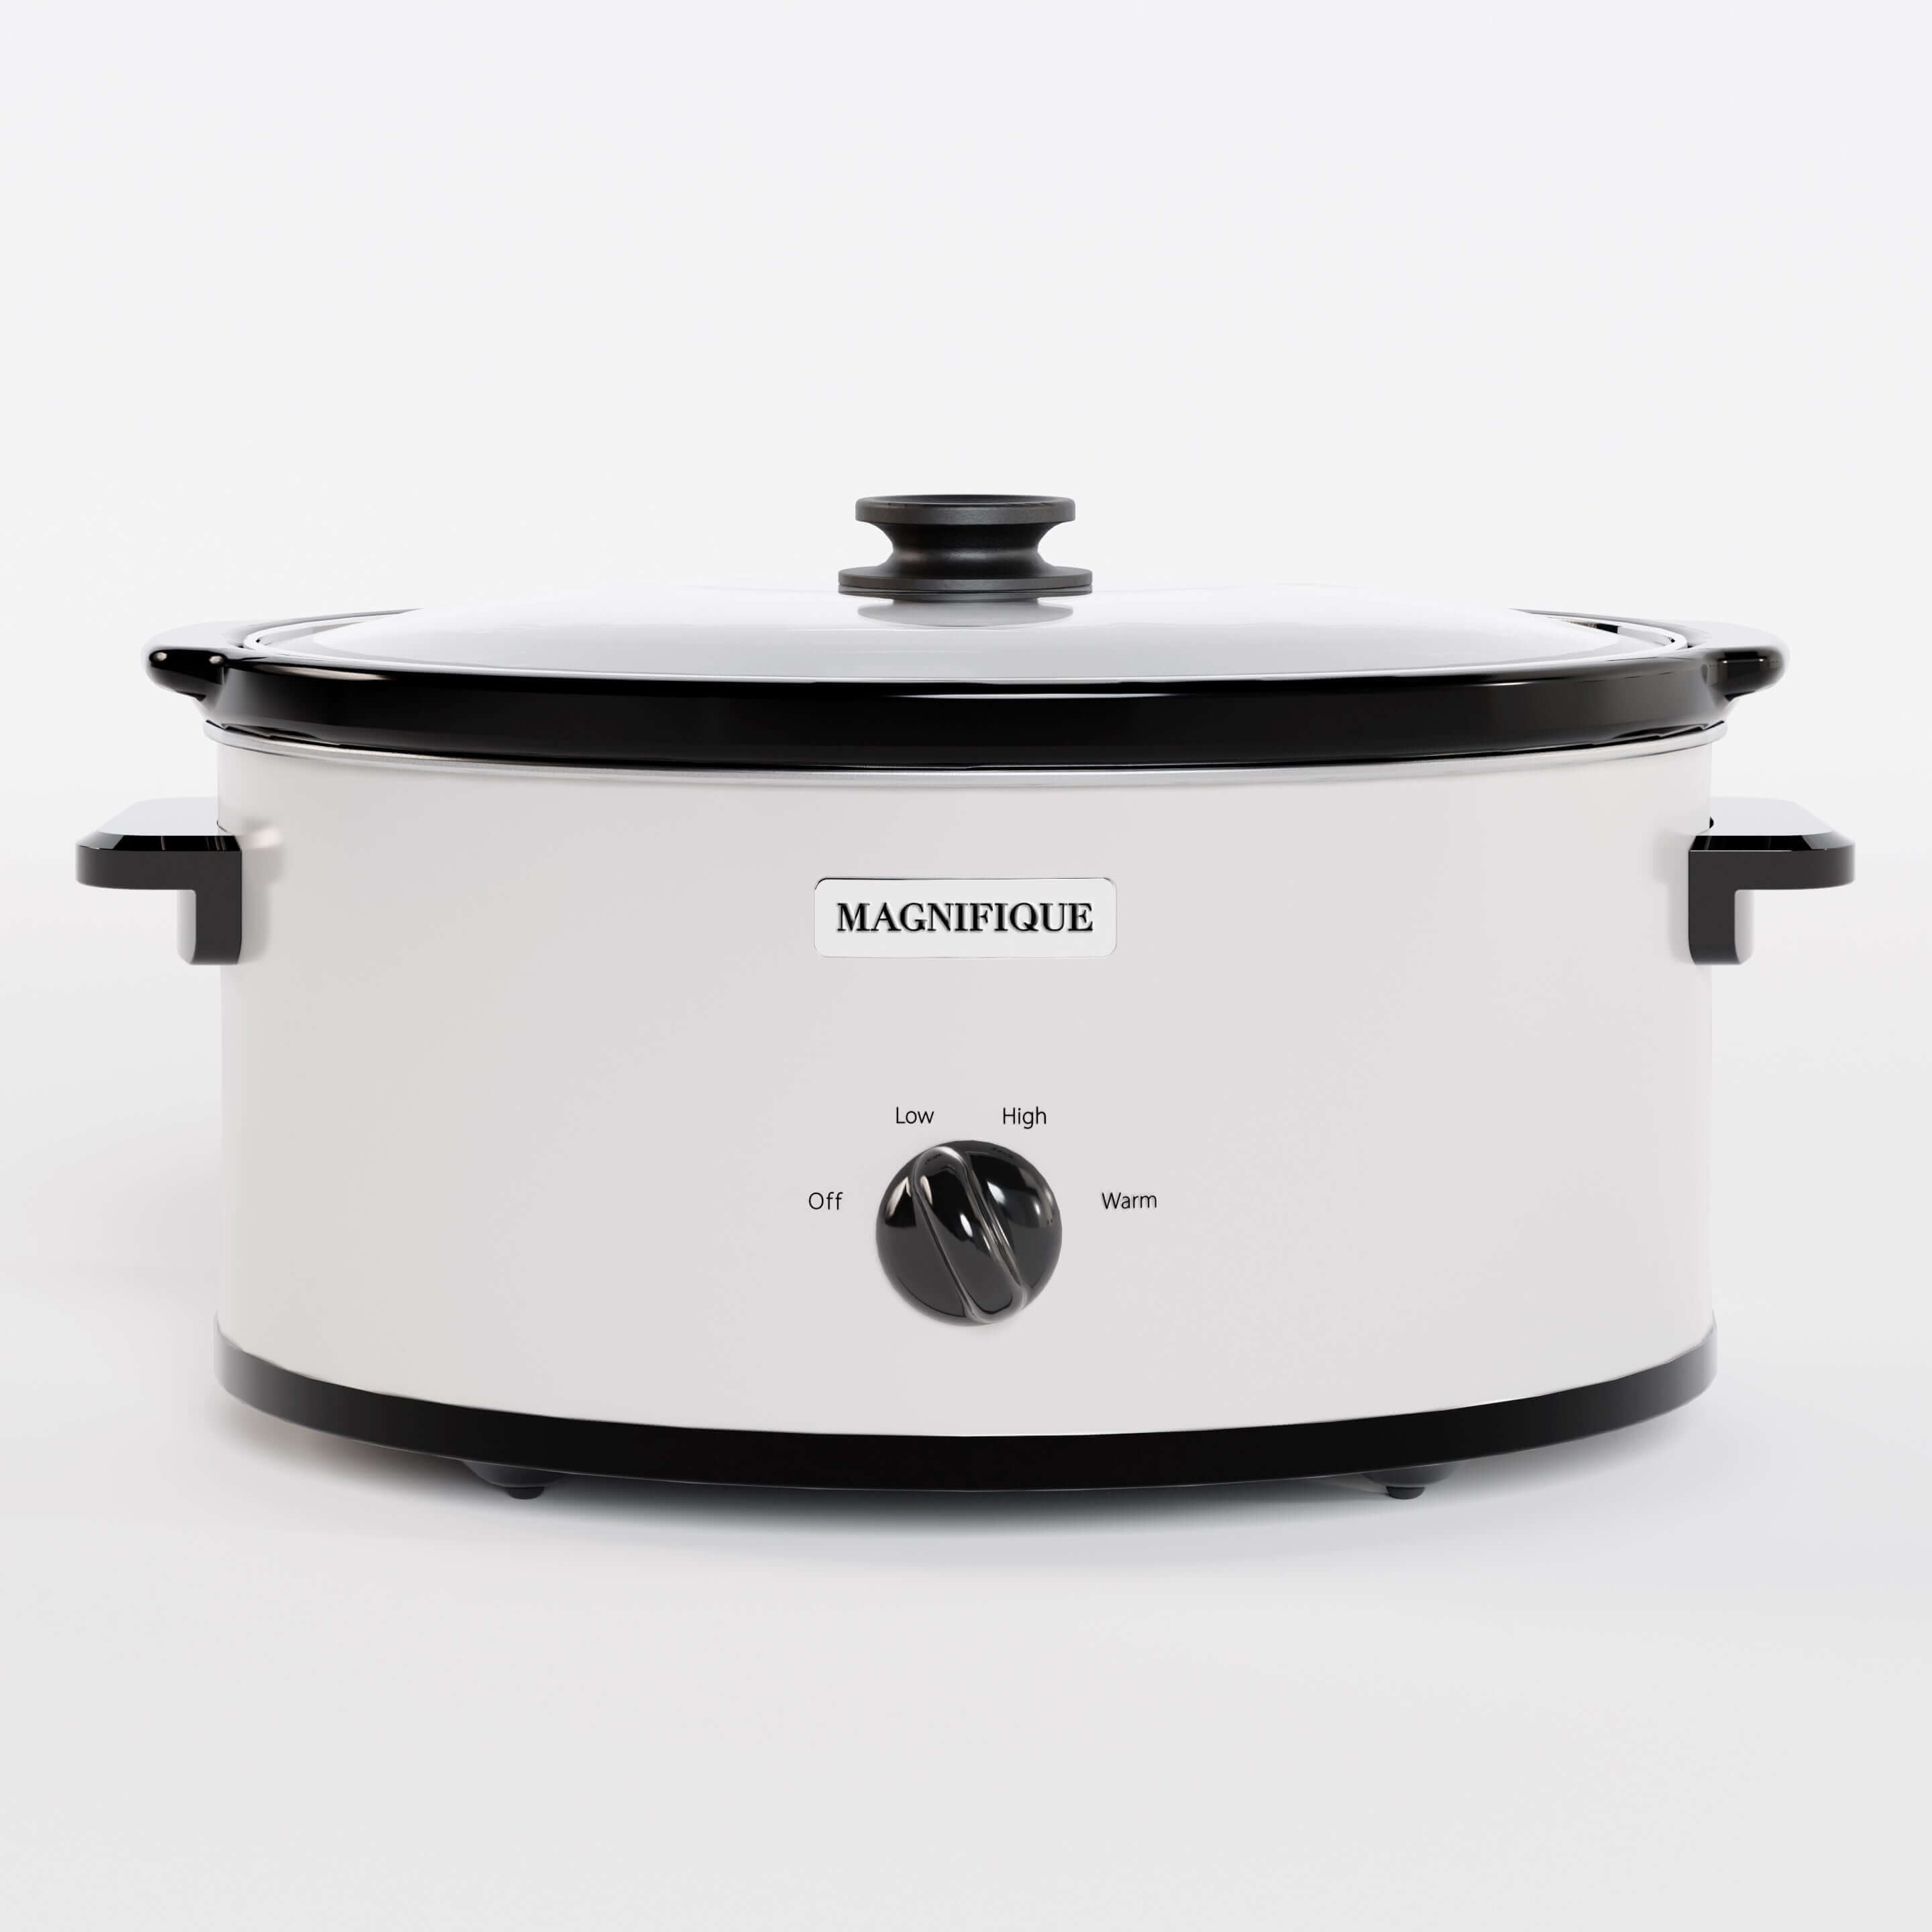 [NEW] MAGNIFIQUE Oval Digital Slow Cooker with Keep Warm Setting - Perfect  Kitchen Small Appliance for Family Dinners (Black Digital, 8 Qt)